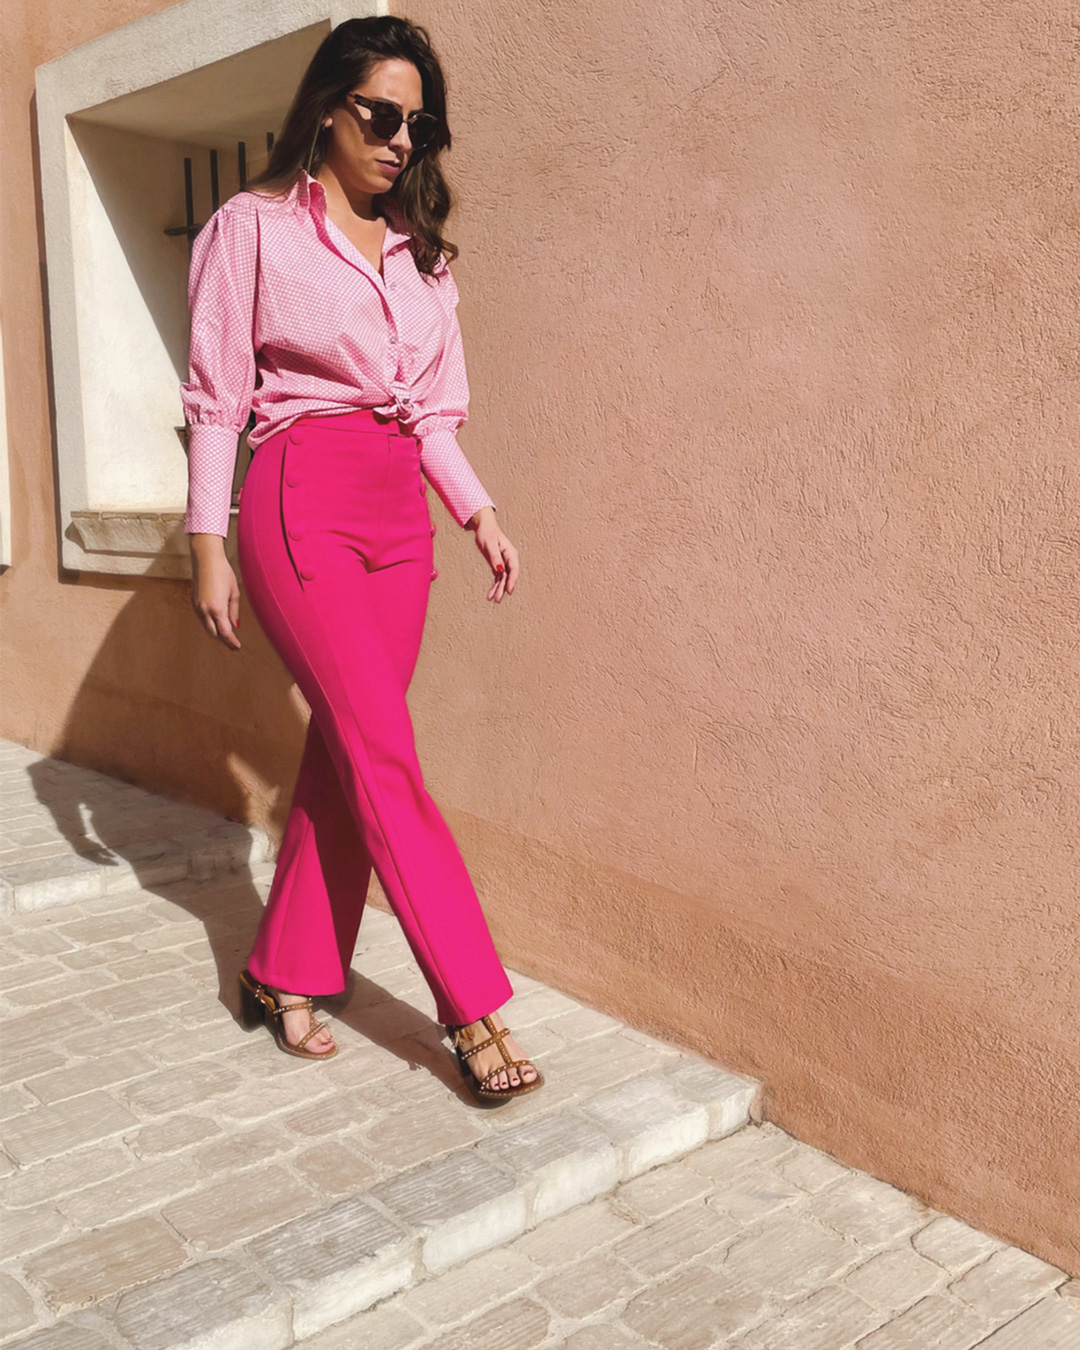 https://sozely.fr/wp-content/uploads/2022/04/sozely-pantalon-rose-coupe-droite-femme.jpg